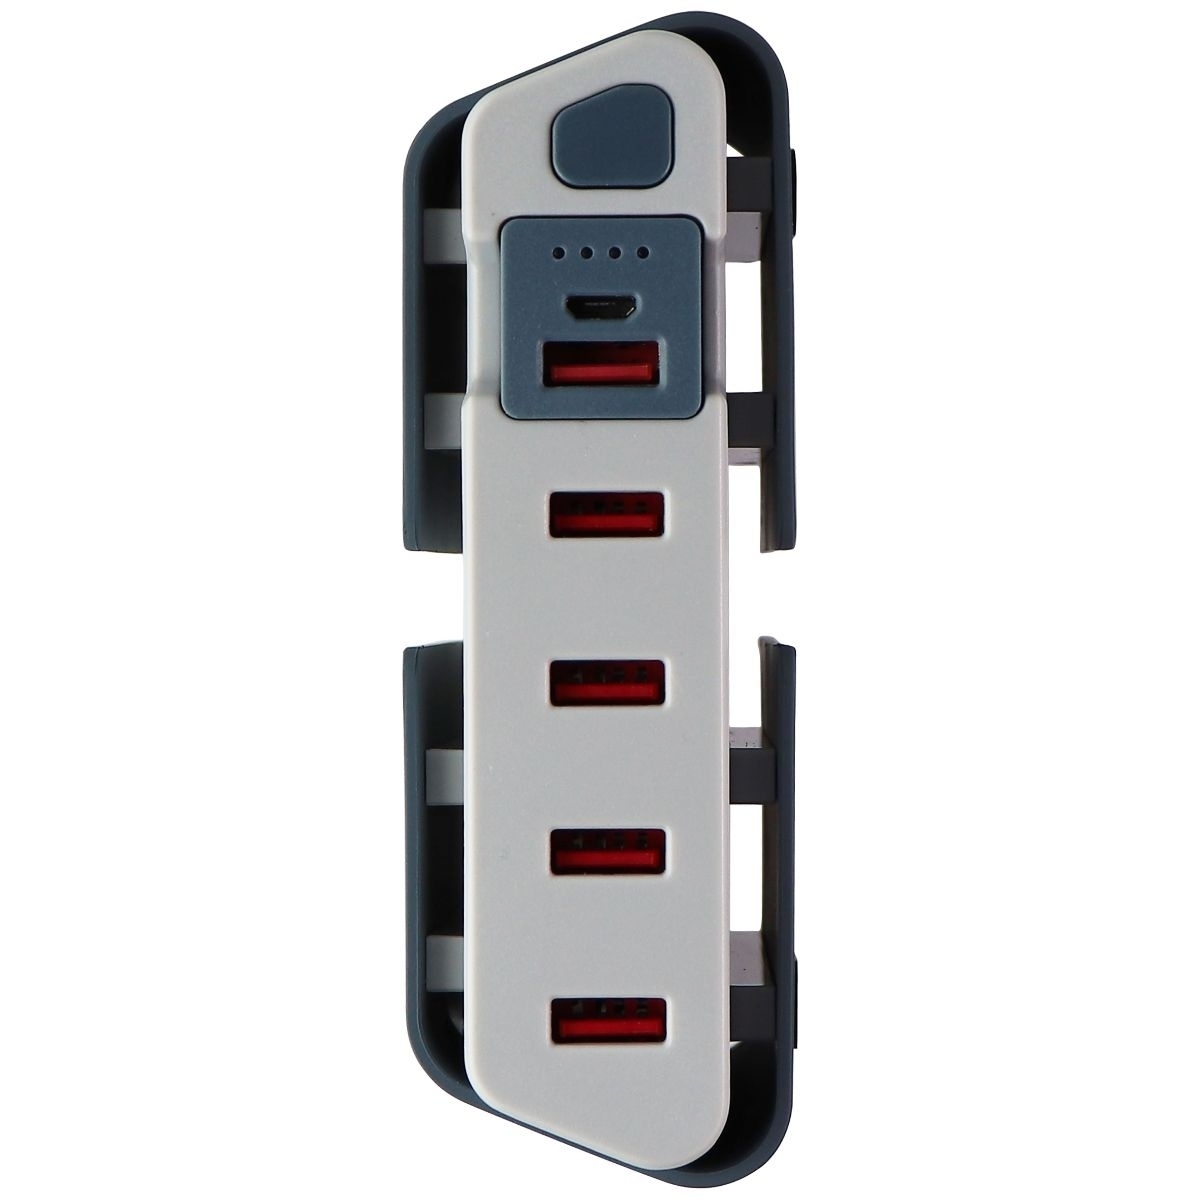 TYLT Energi Desktop Charging Station With 4 USB Ports + Portable Battery - Gray